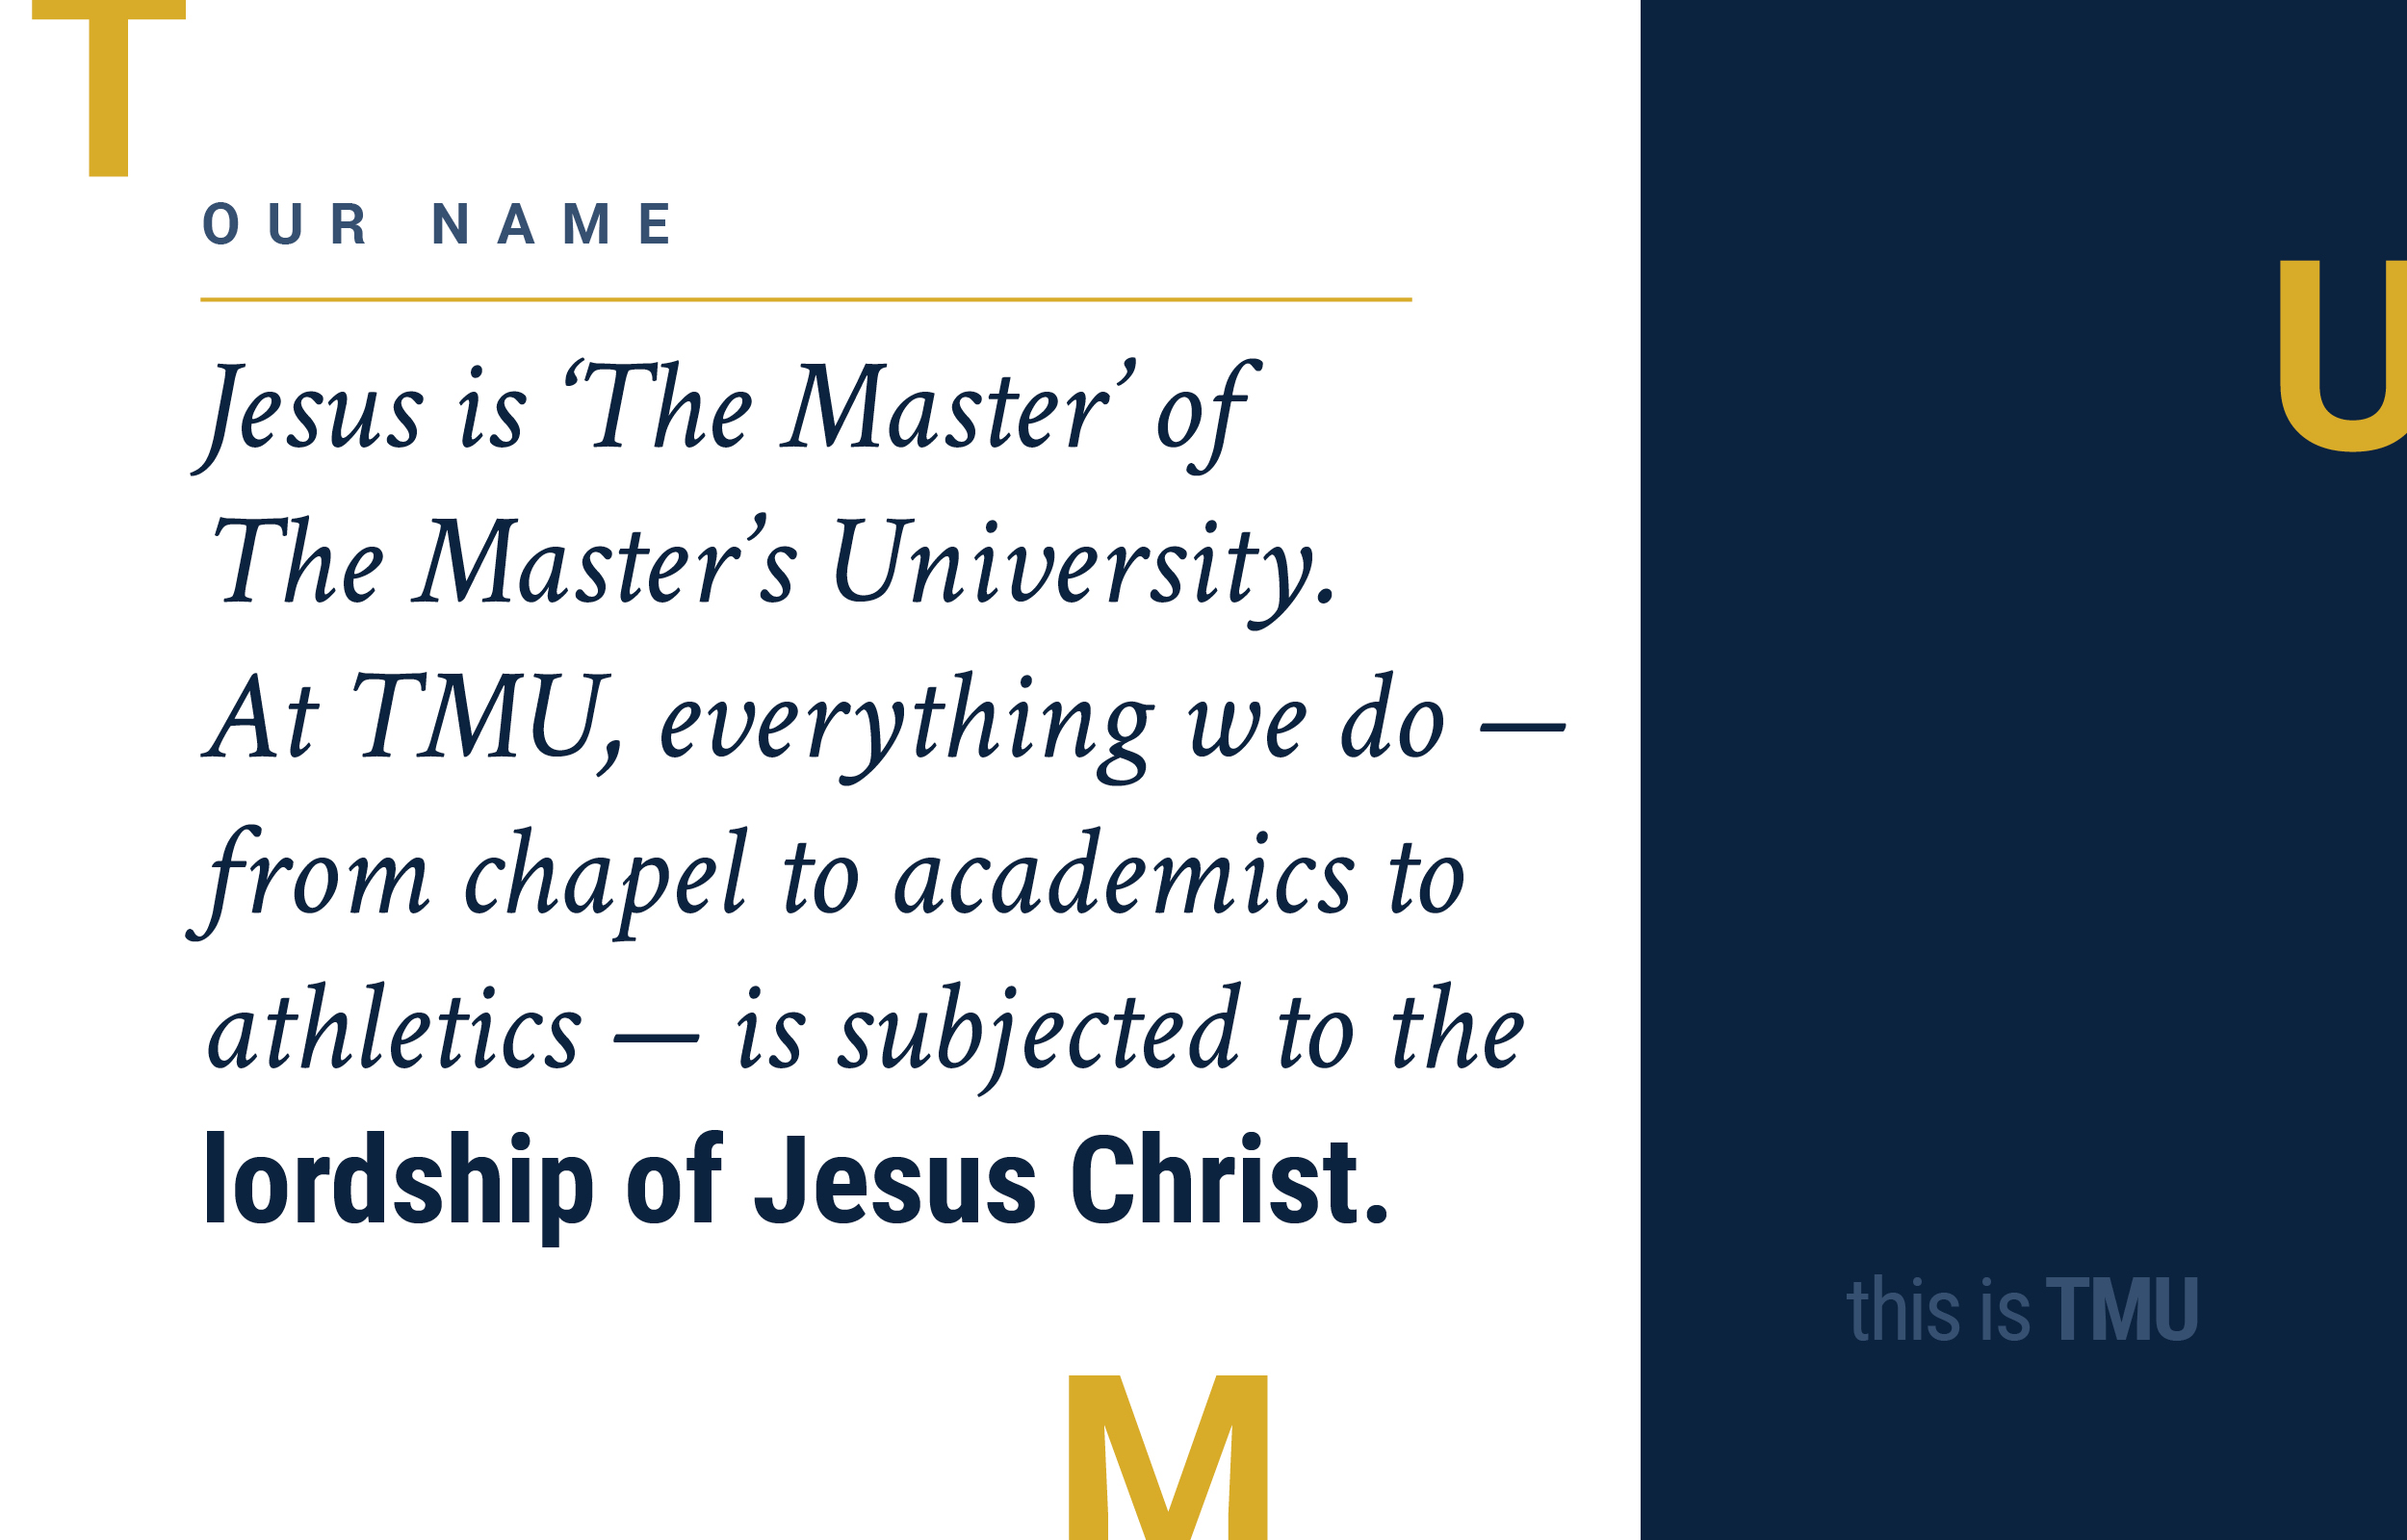 This is TMU: Our Name